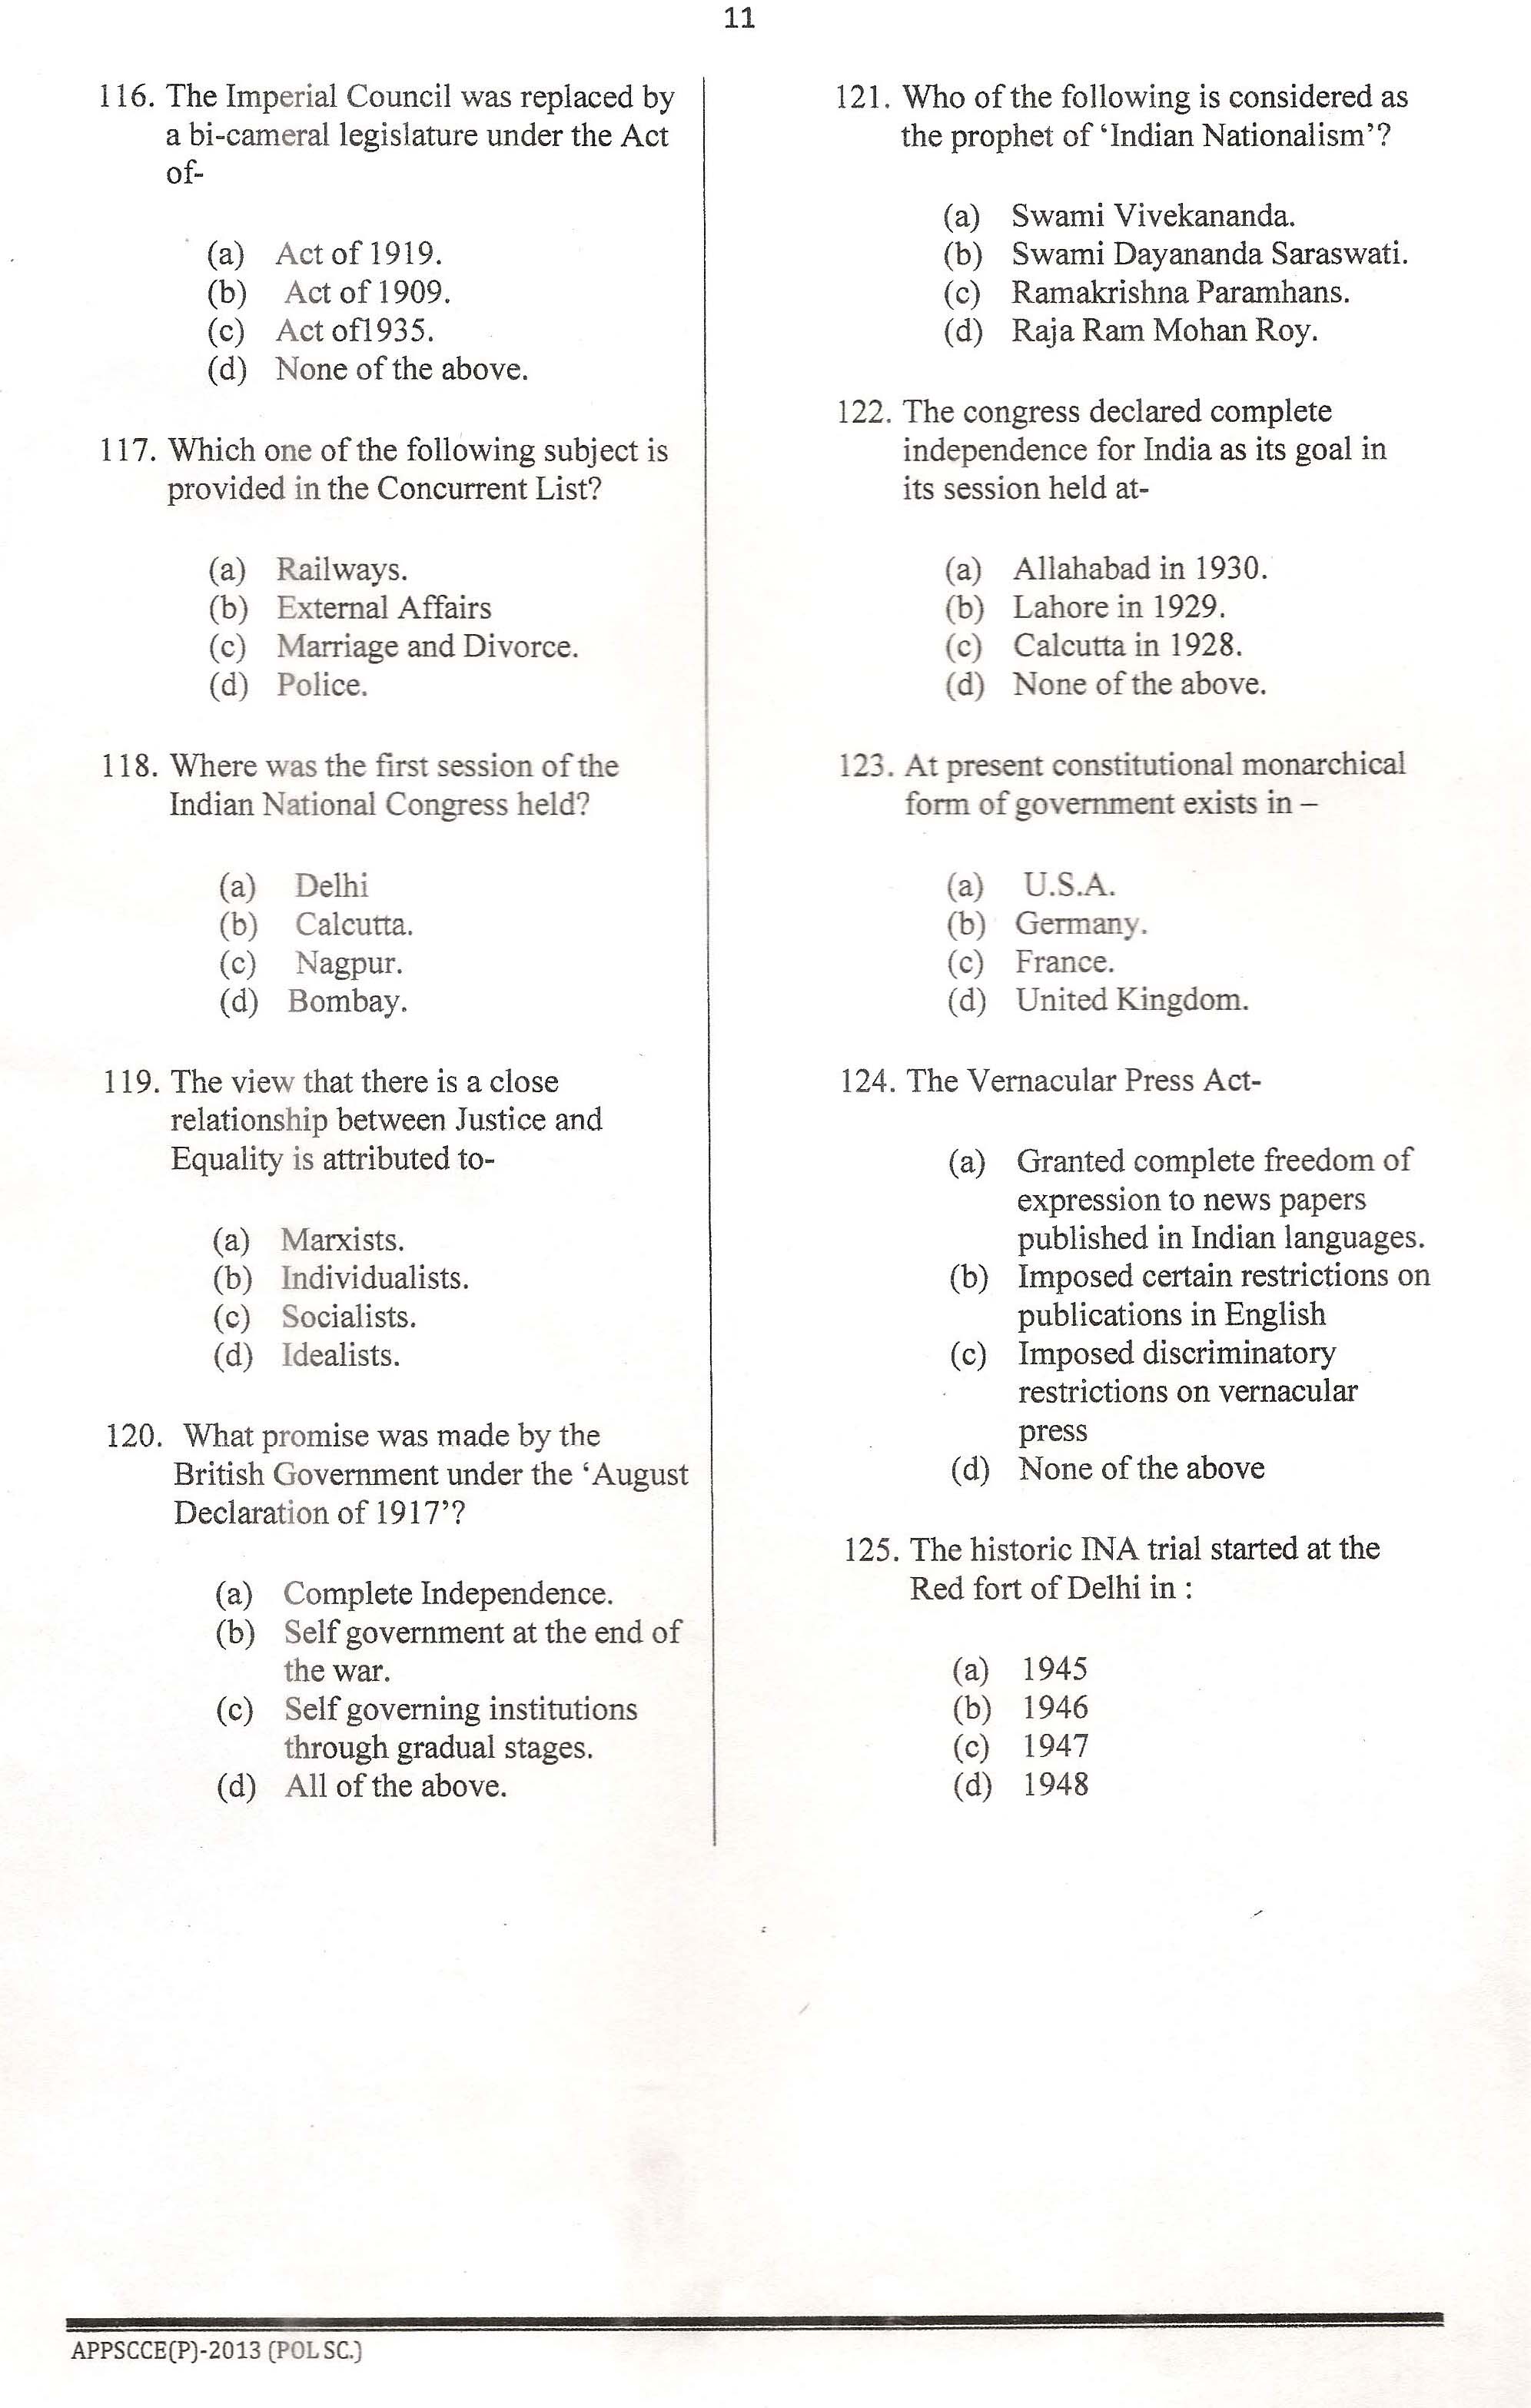 APPSC Combined Competitive Prelims Exam 2013 Political Science 12